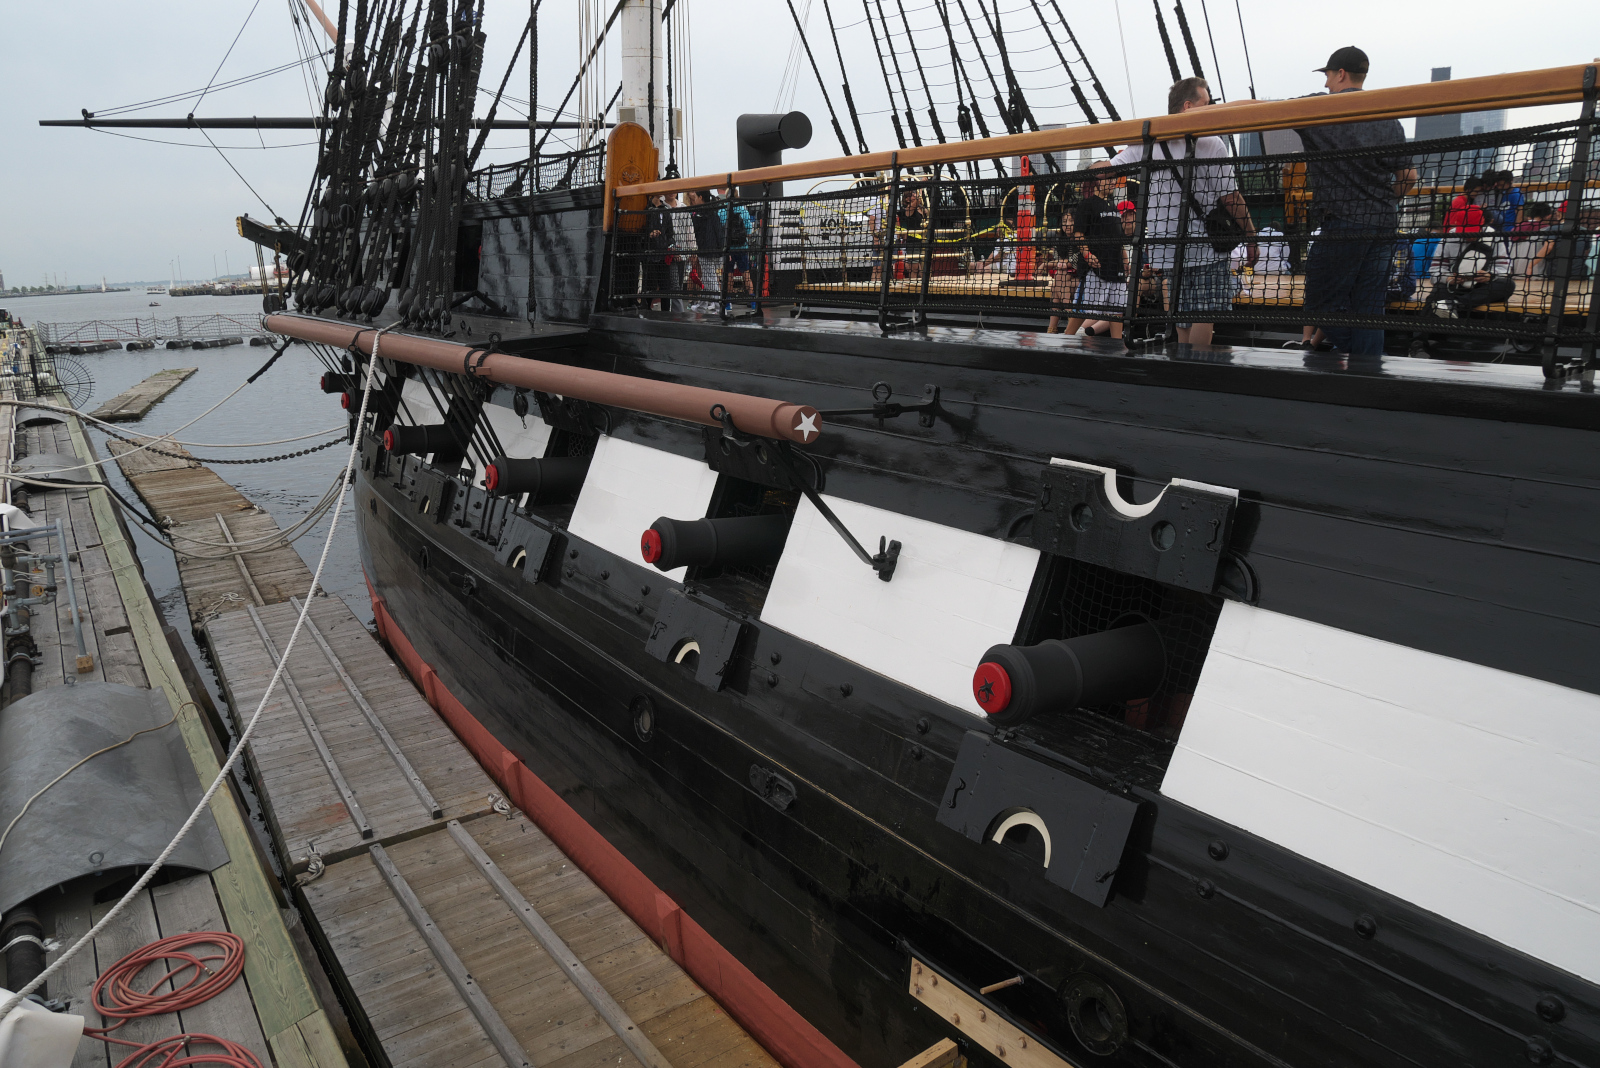 Port side of the USS Constitution, with the cannons protruding from their ports on the gun deck.